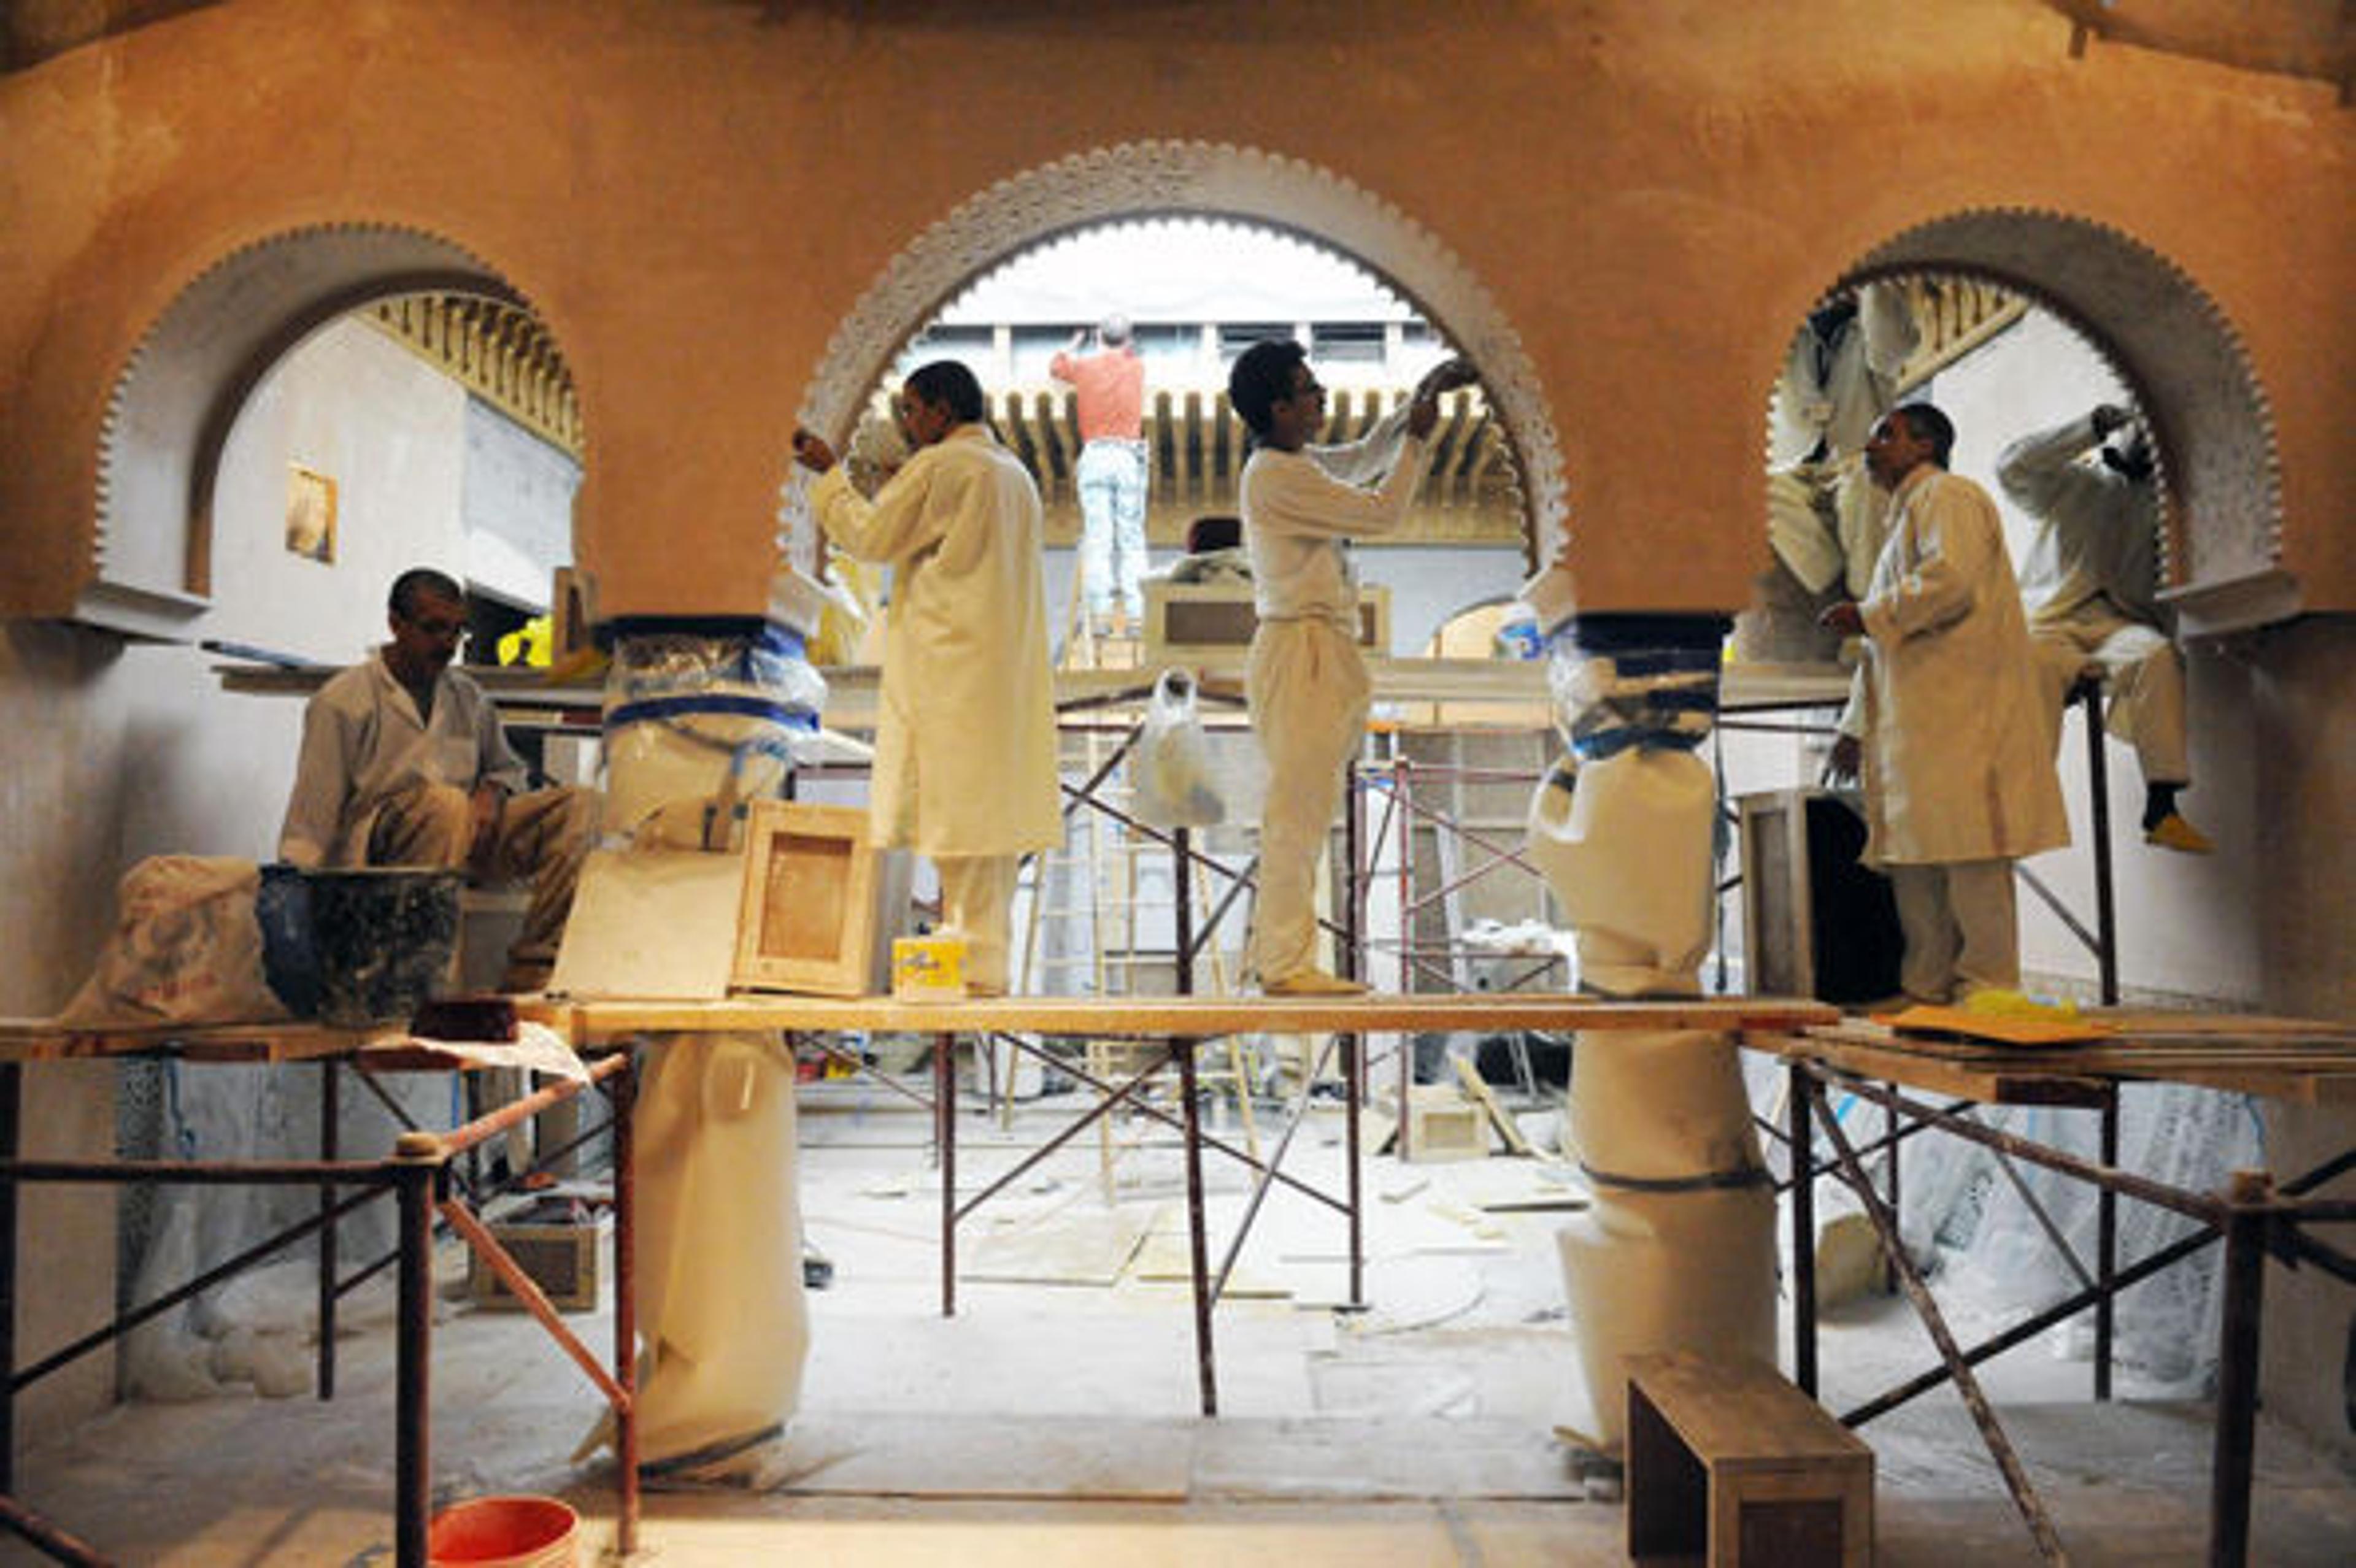 Craftsmen Working in the Moroccan Court